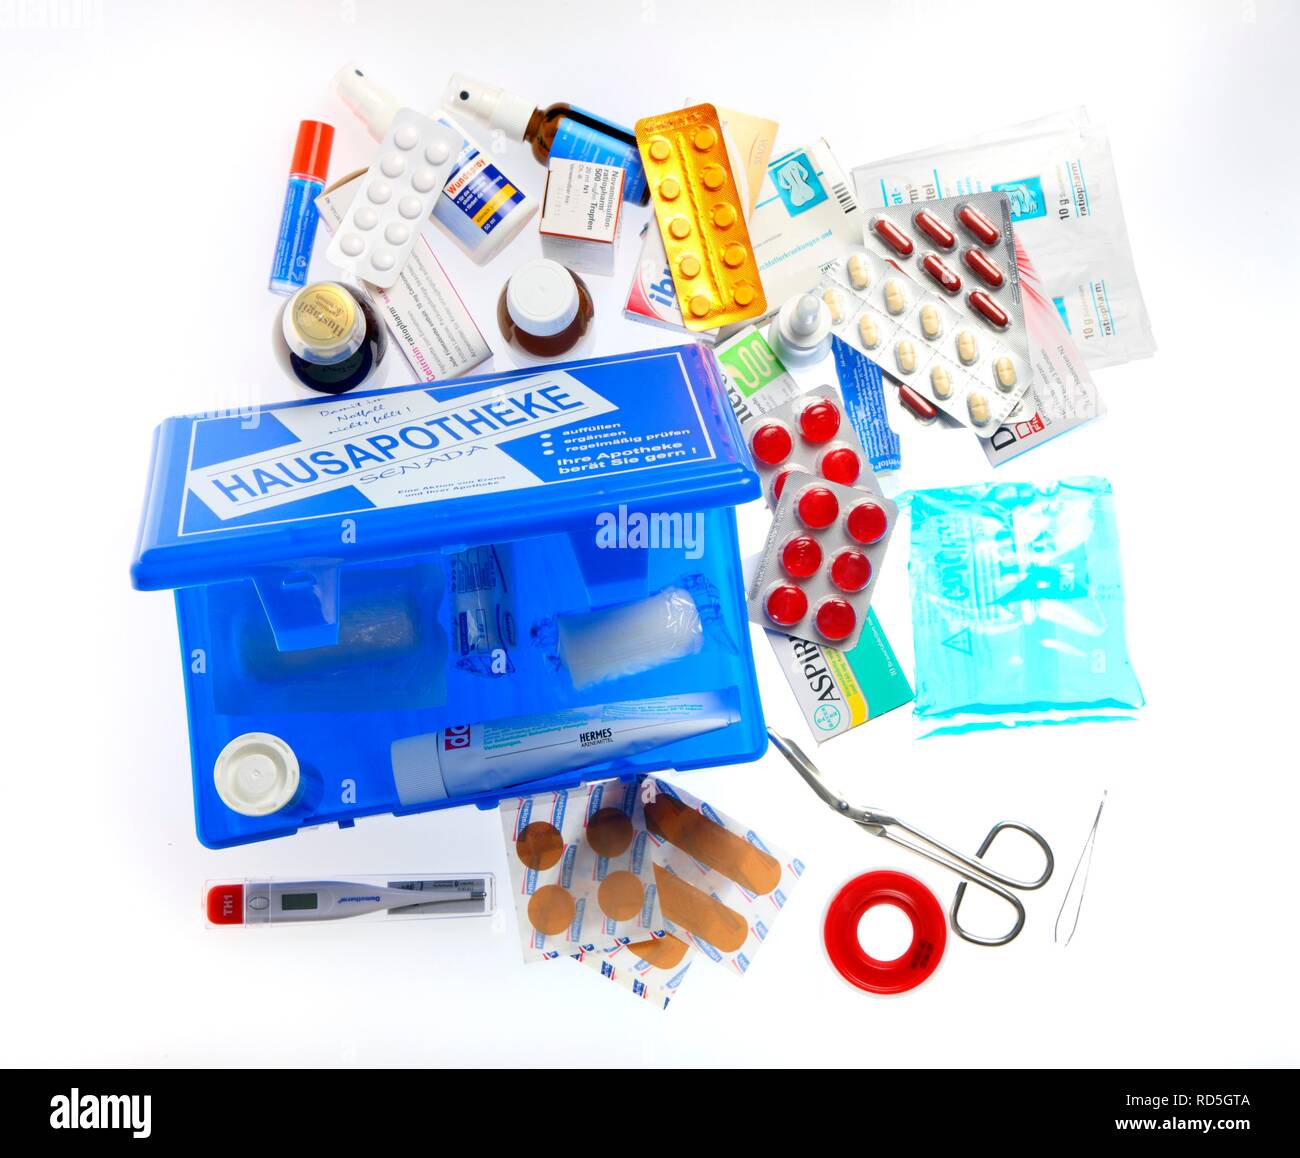 Home medicine chest with a selection of medicines and dressing material Stock Photo